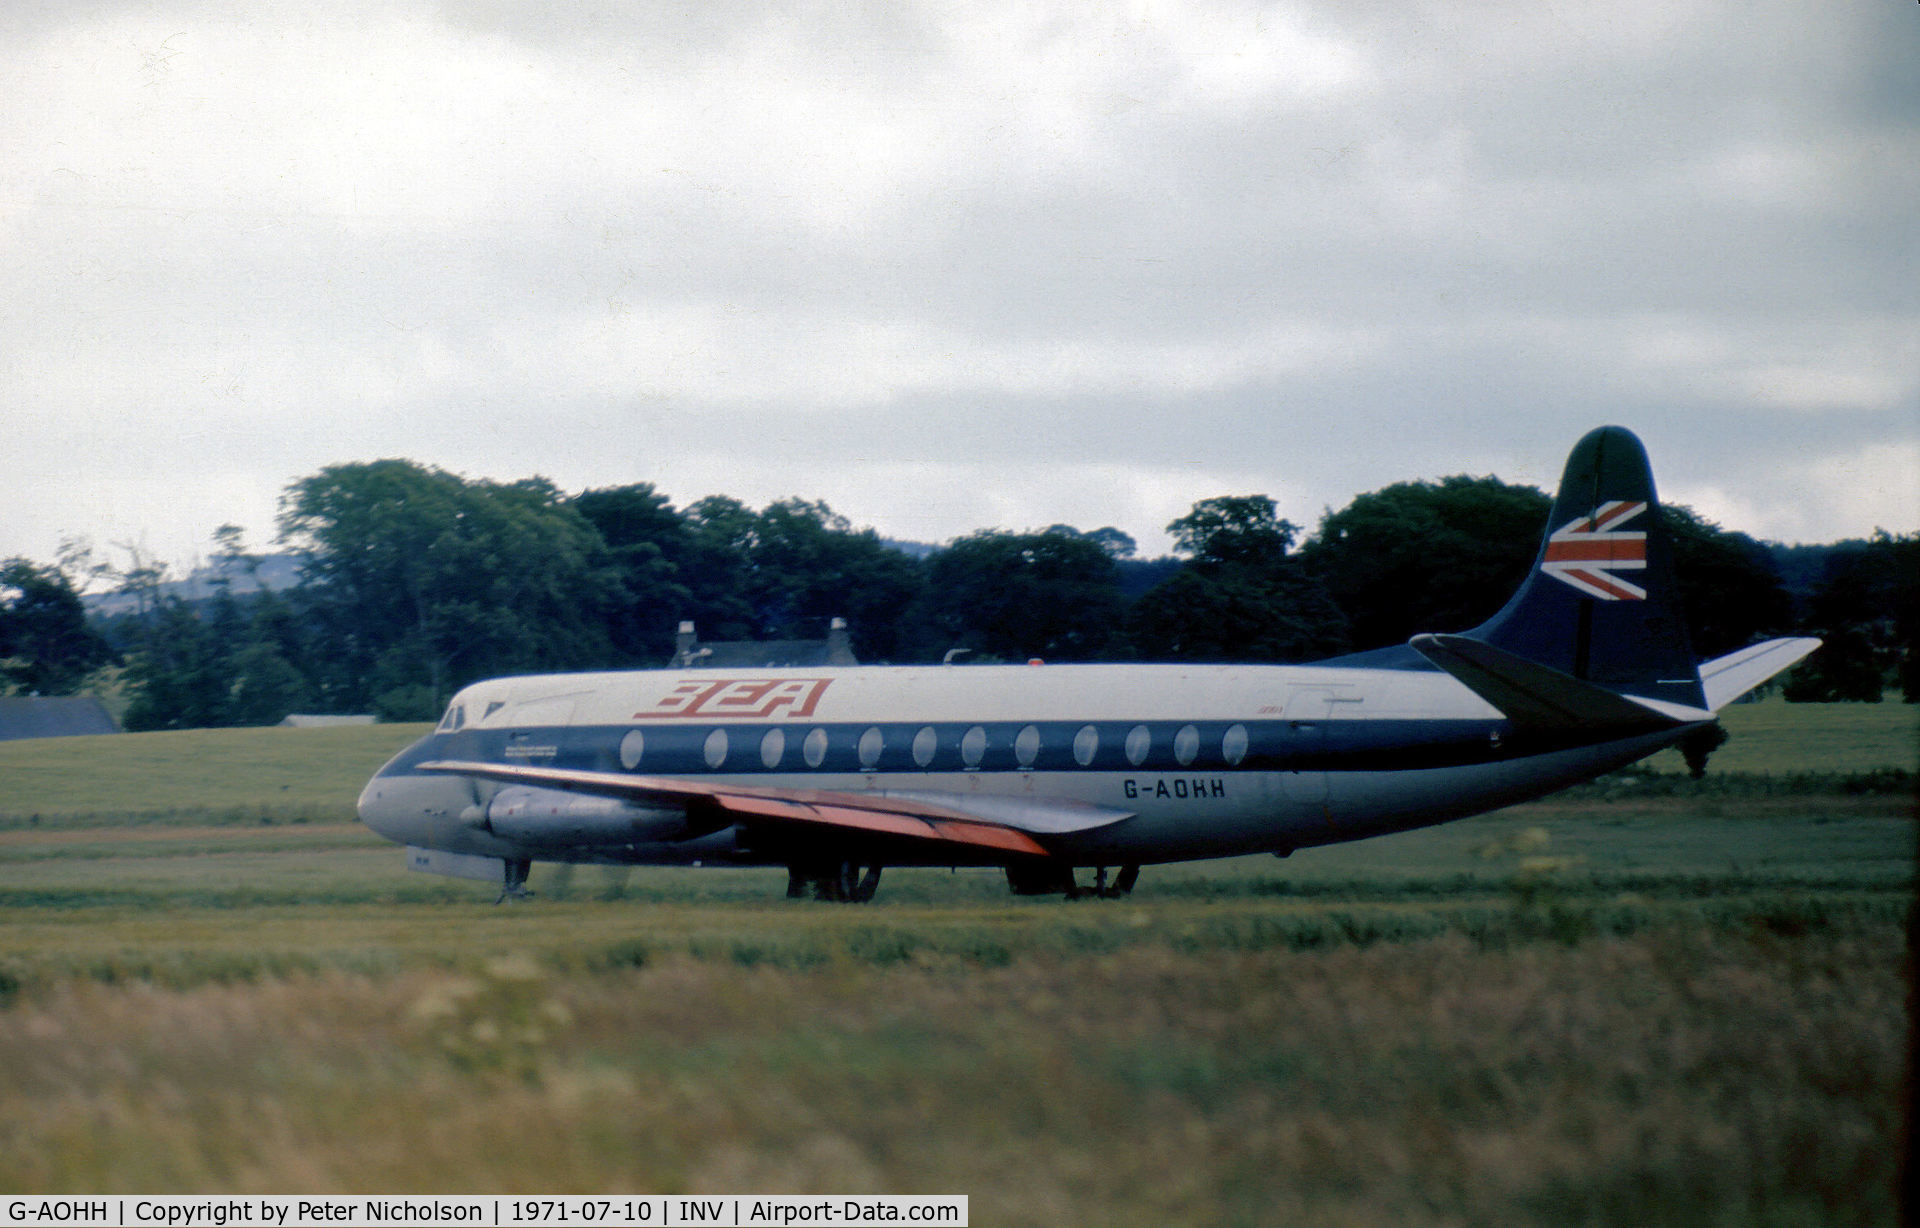 G-AOHH, 1957 Vickers Viscount 802 C/N 157, Viscount 802 of British European Airways preparing for departure at Inverness in the Summer of 1971.